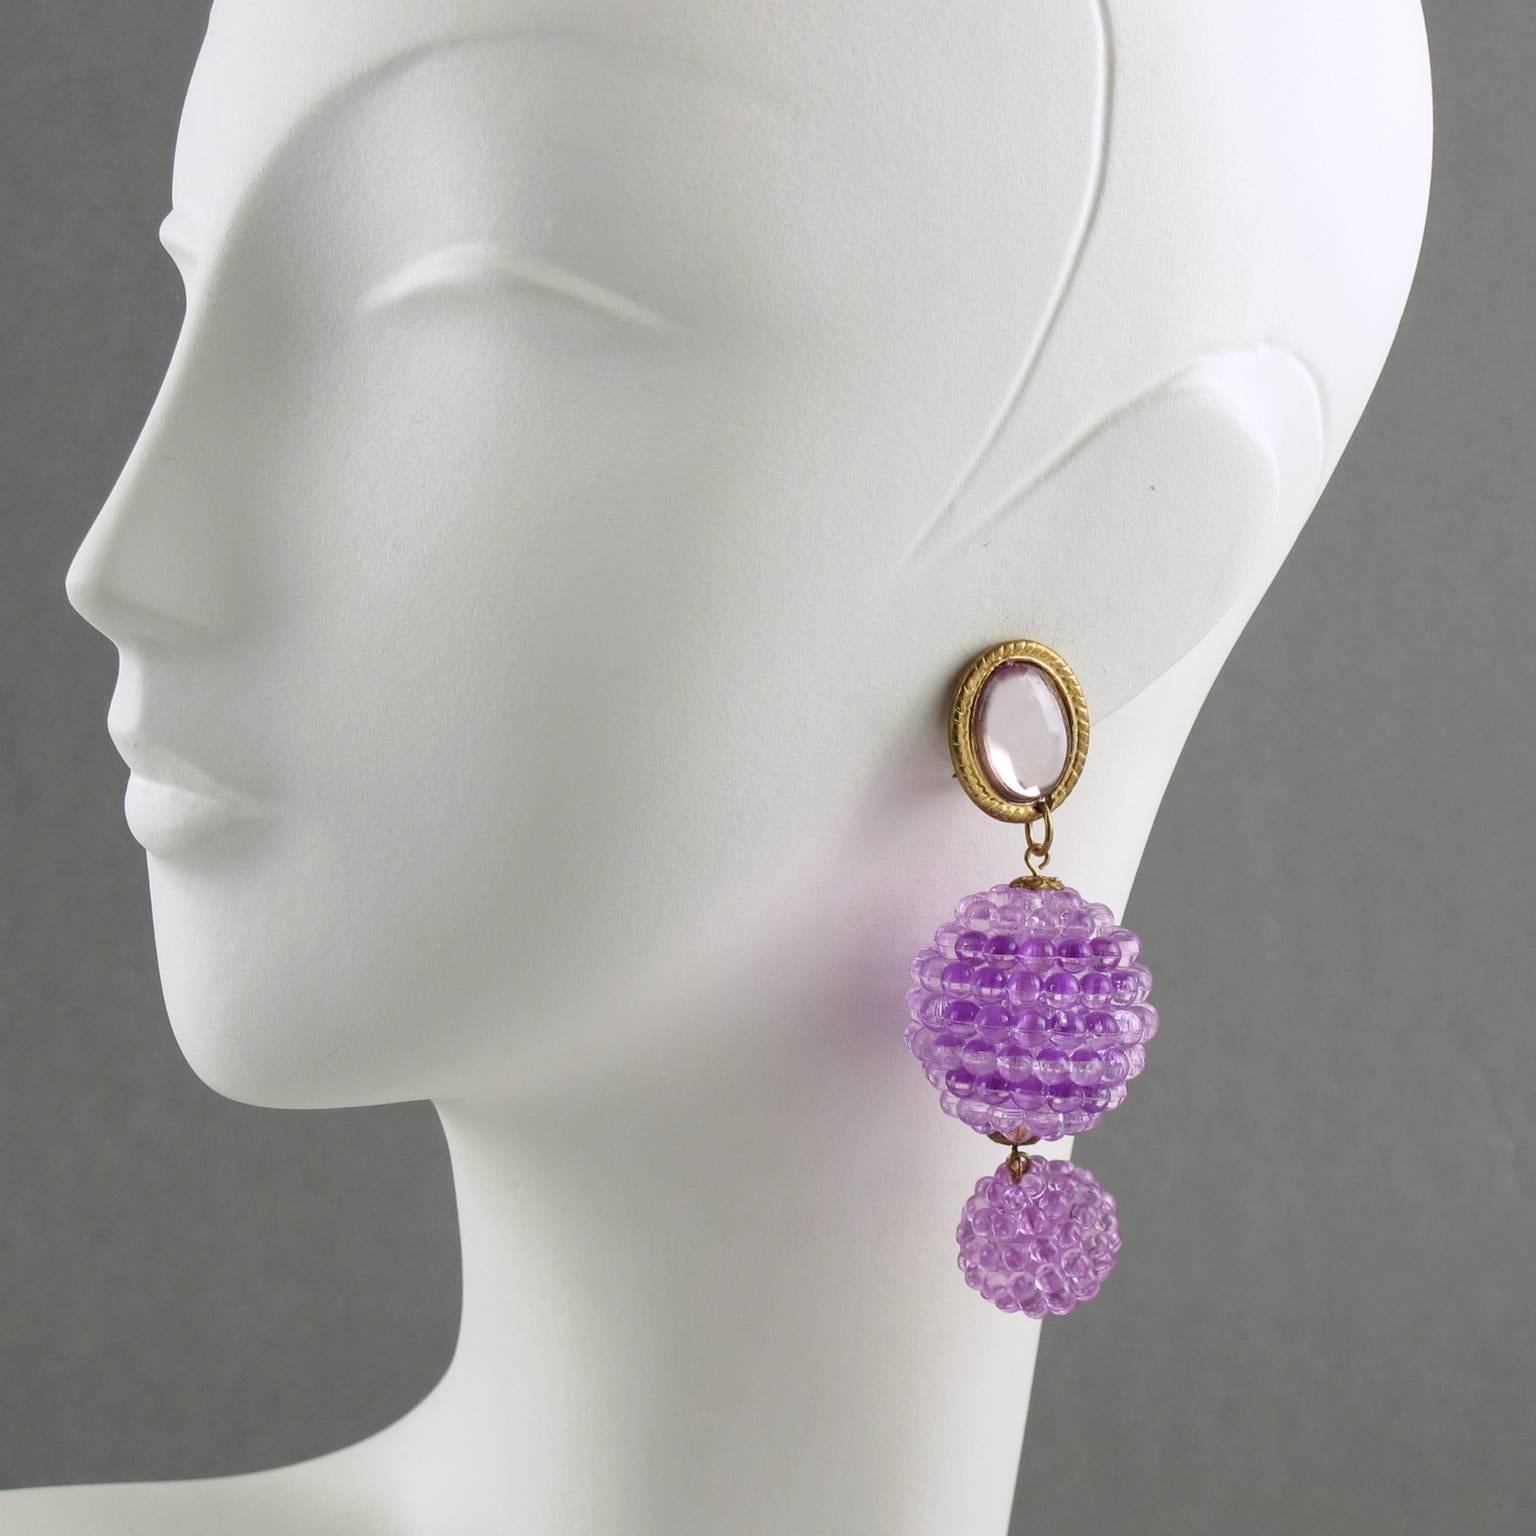 Lovely vintage 1960s dangling clip-on earrings. Very playful design with Lucite beads in transparent lilac purple color all textured. Long dangling shape and gilt metal with purple mirror effect lucite cabochon clip. No visible marking. Excellent